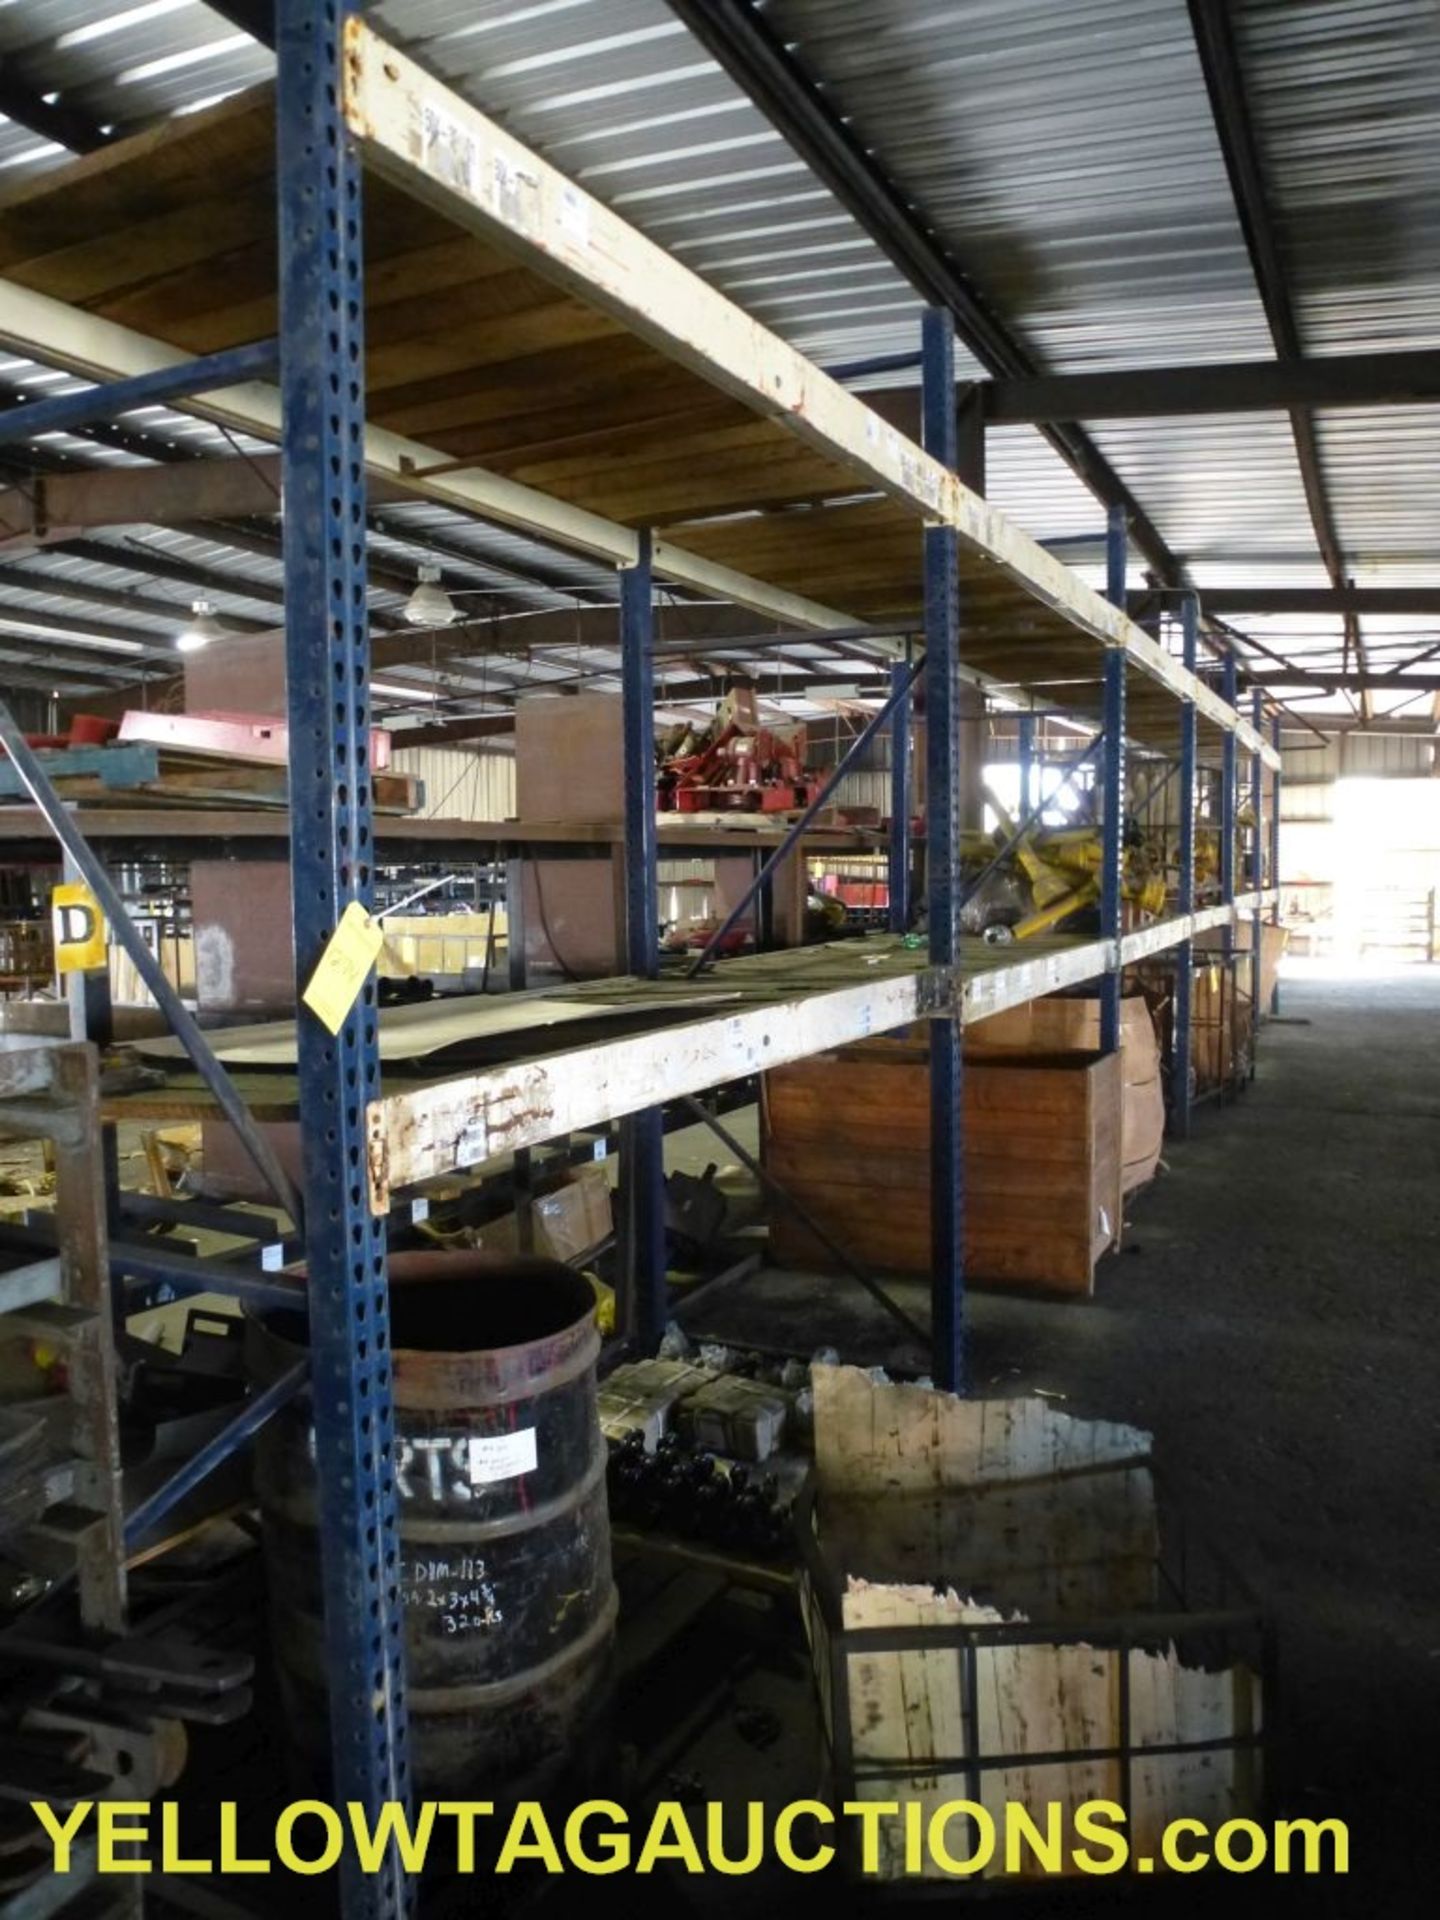 Lot of Assorted Pallet Racking|(7) Tear Drop Uprights, 10' 8" x 42" x 3"; (24) Cross Beams with Wood